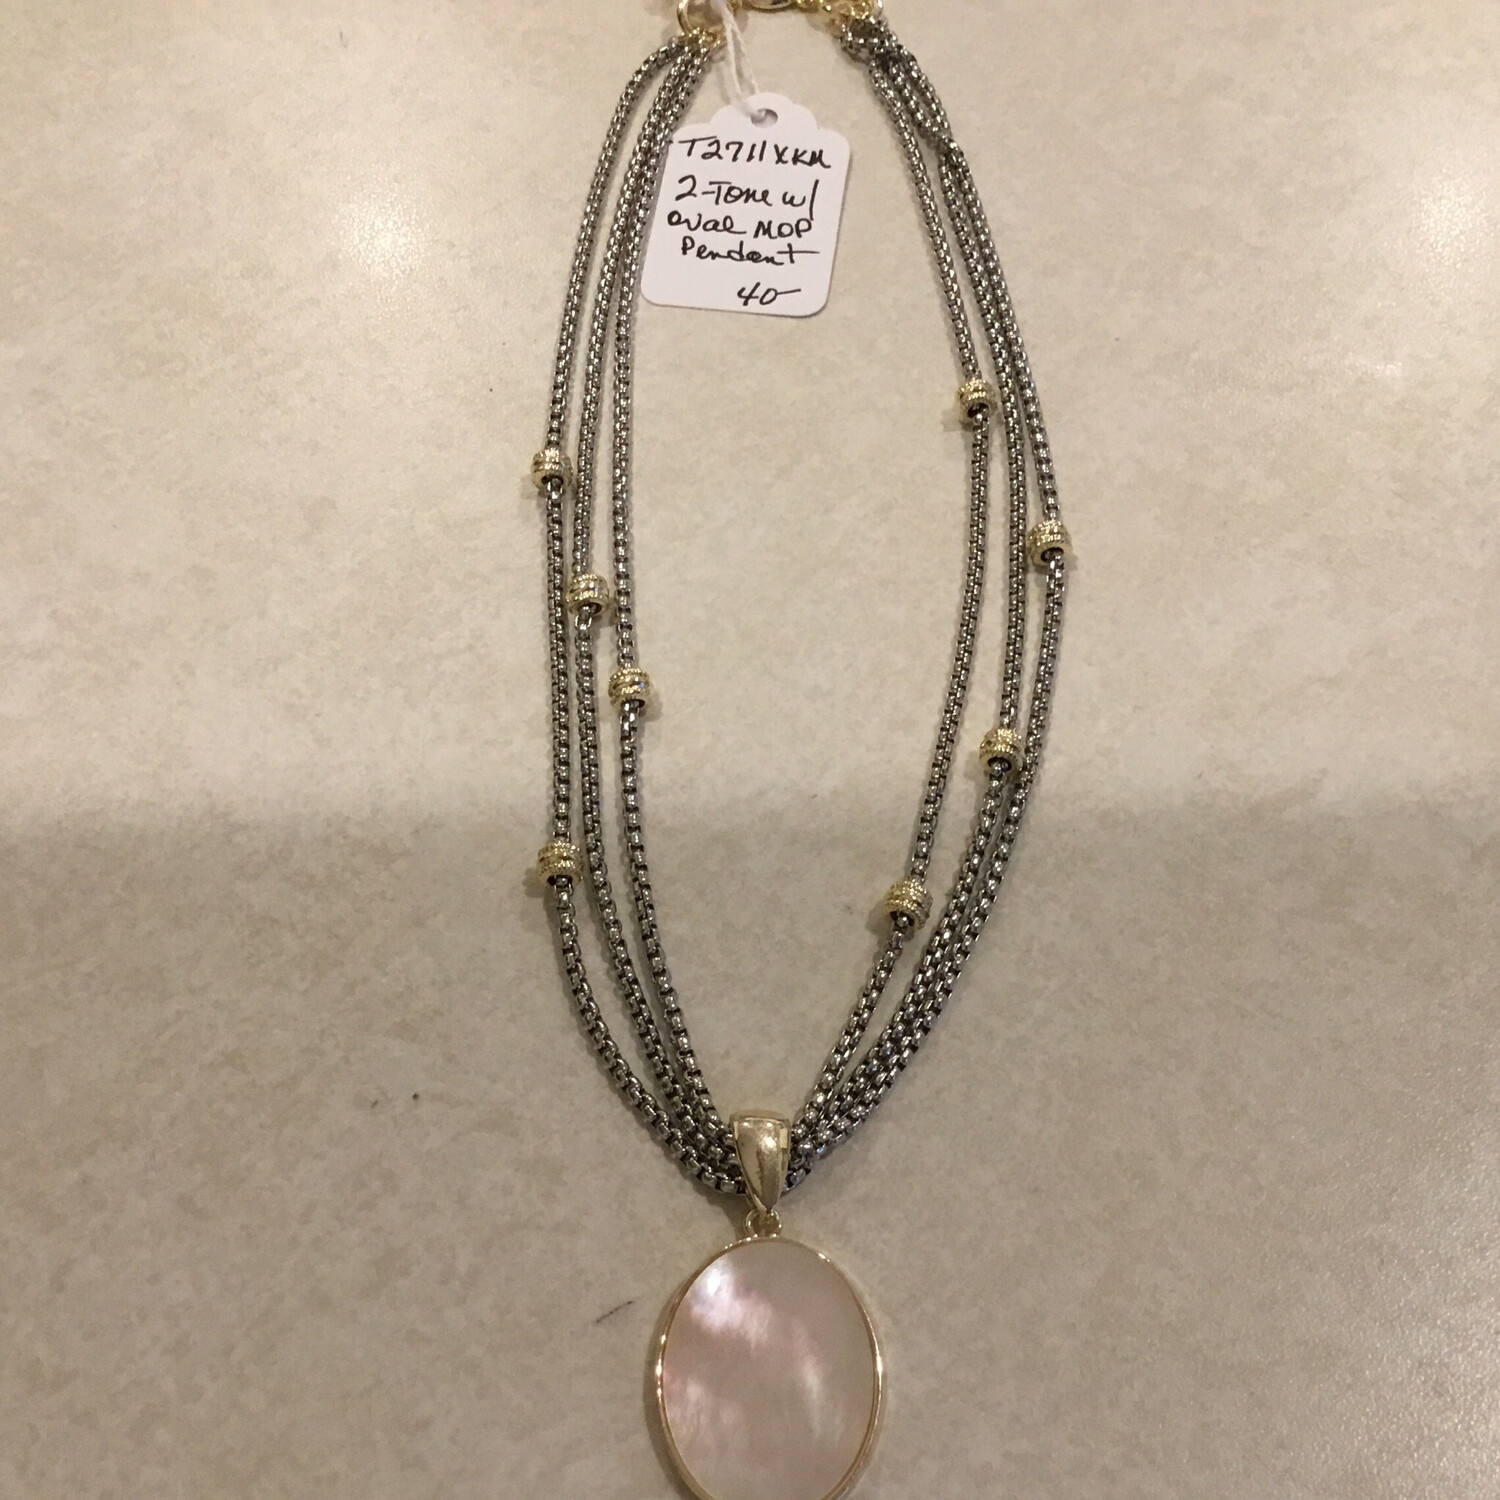 Necklace With Beautiful Mother Of Pearl Pendant 18 Inch +2